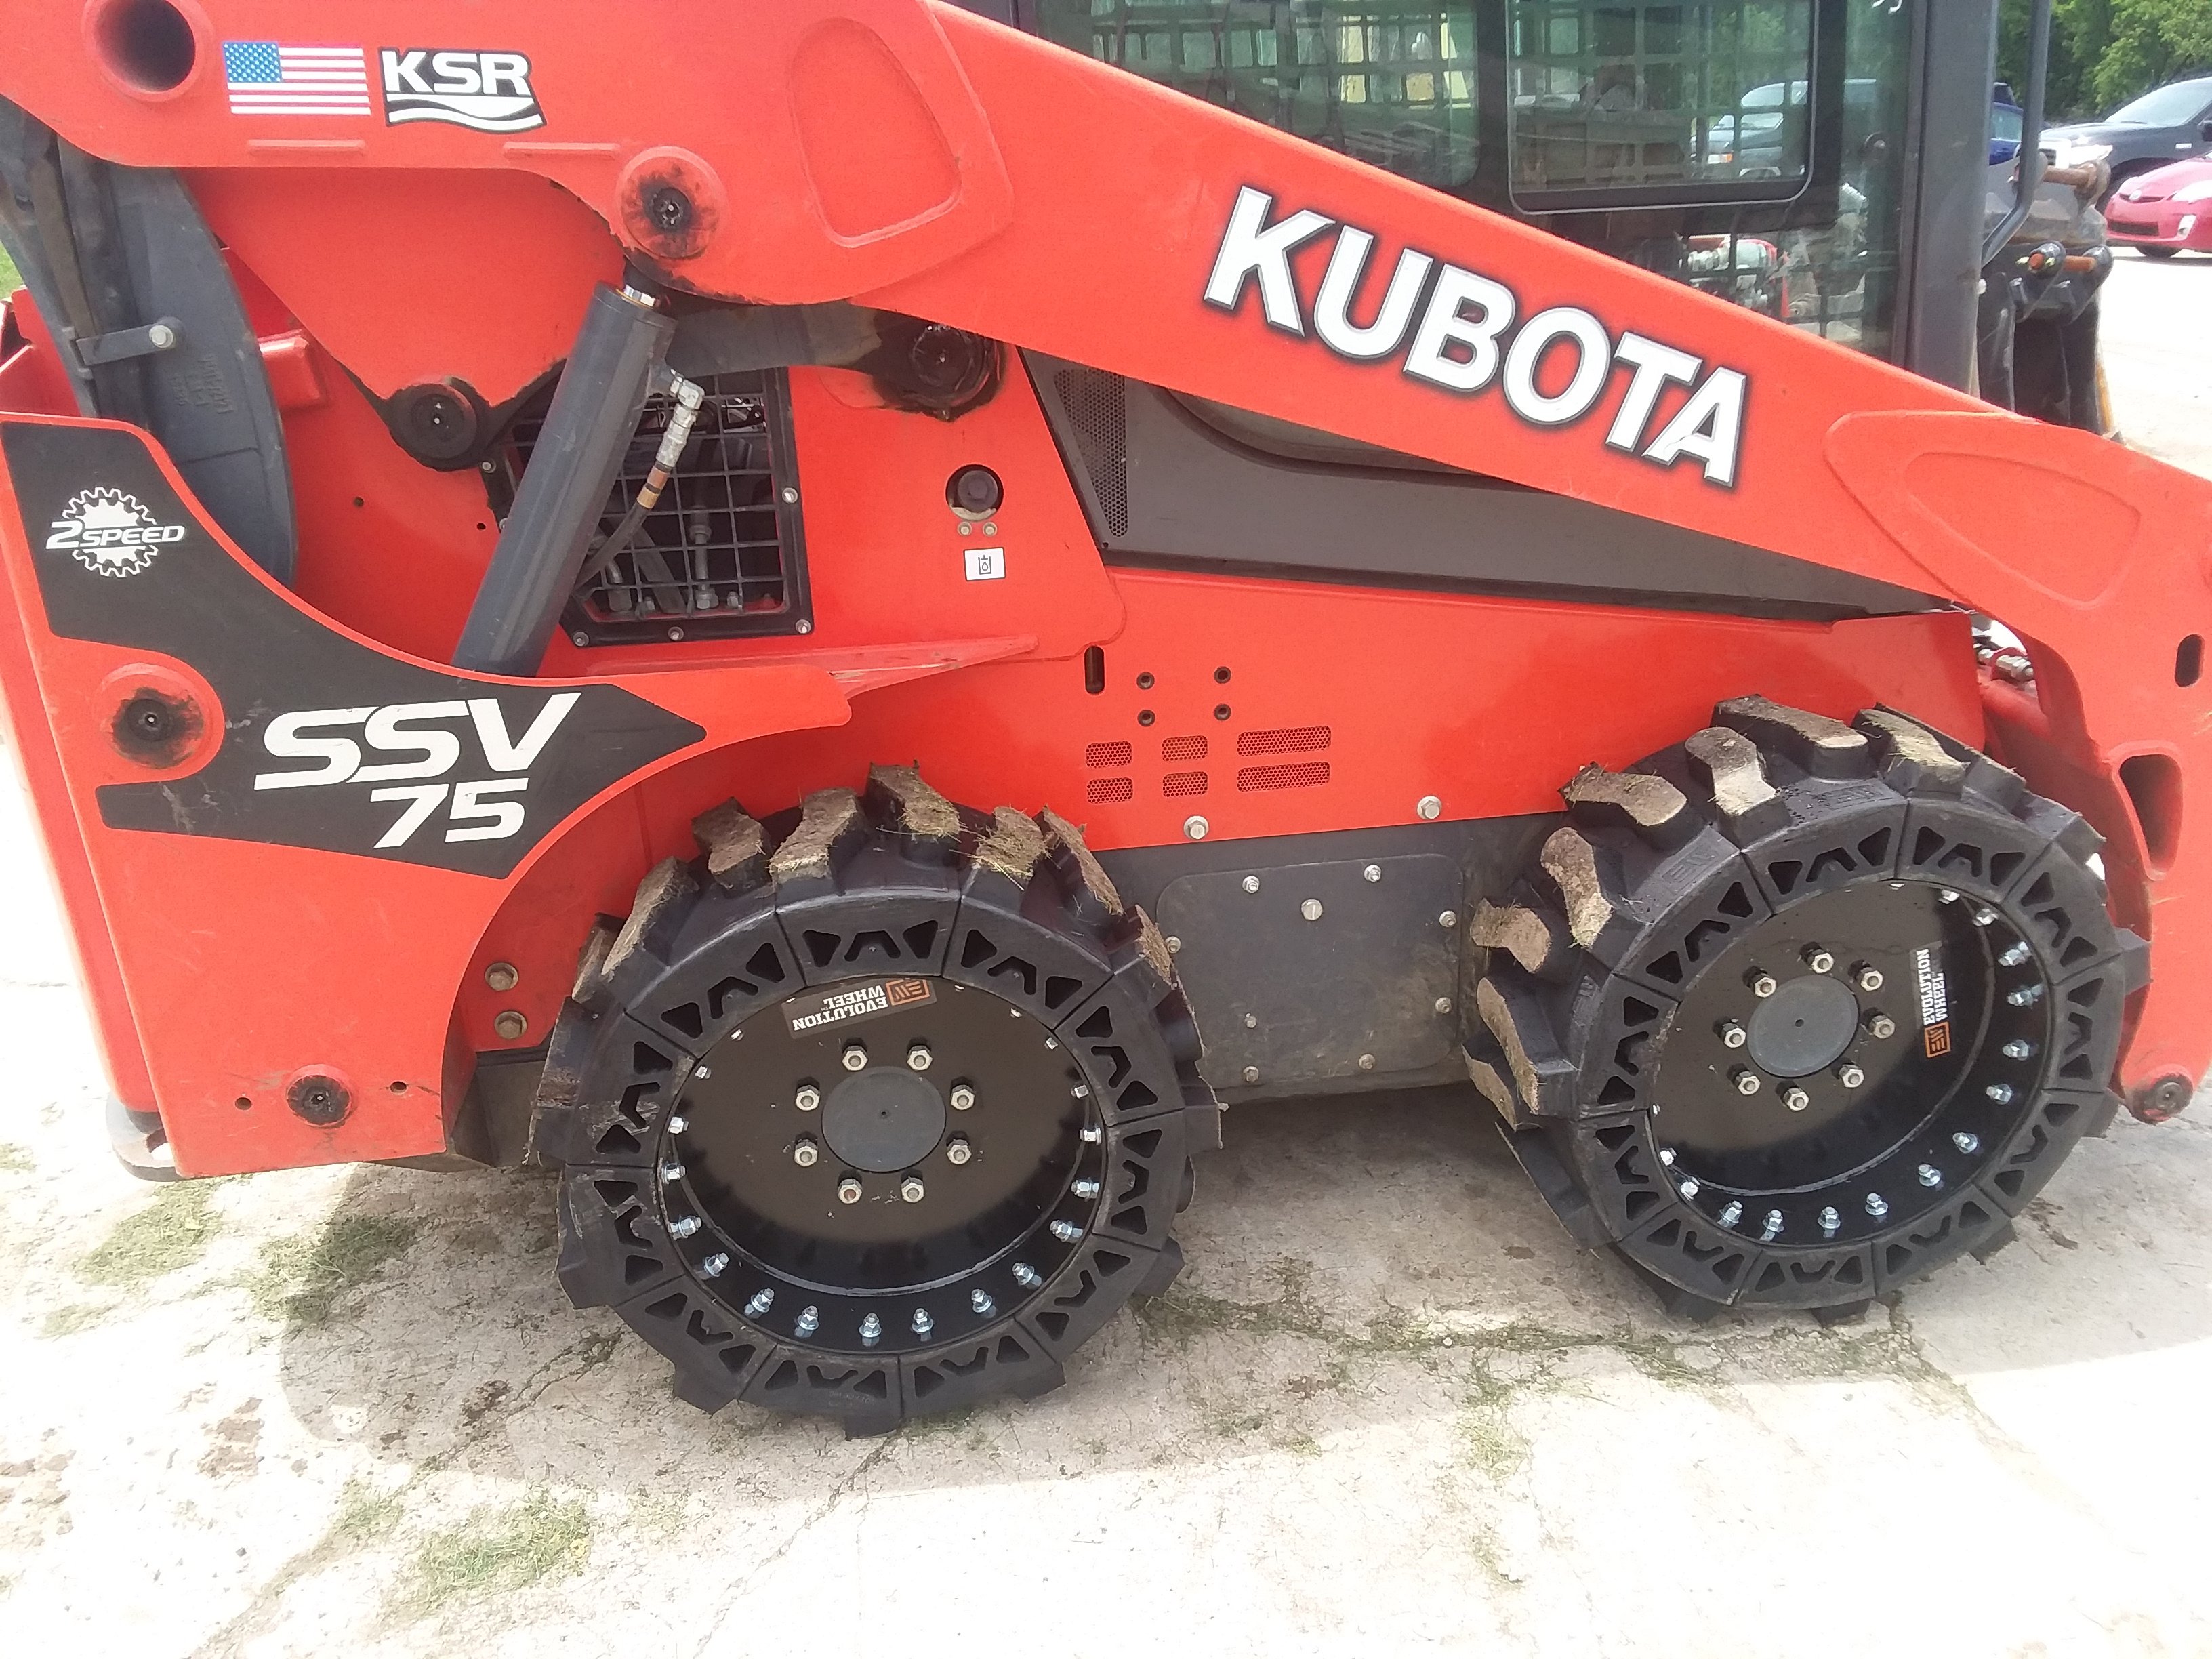 This images shows a red Kubota skid steer using our skid loader tires.